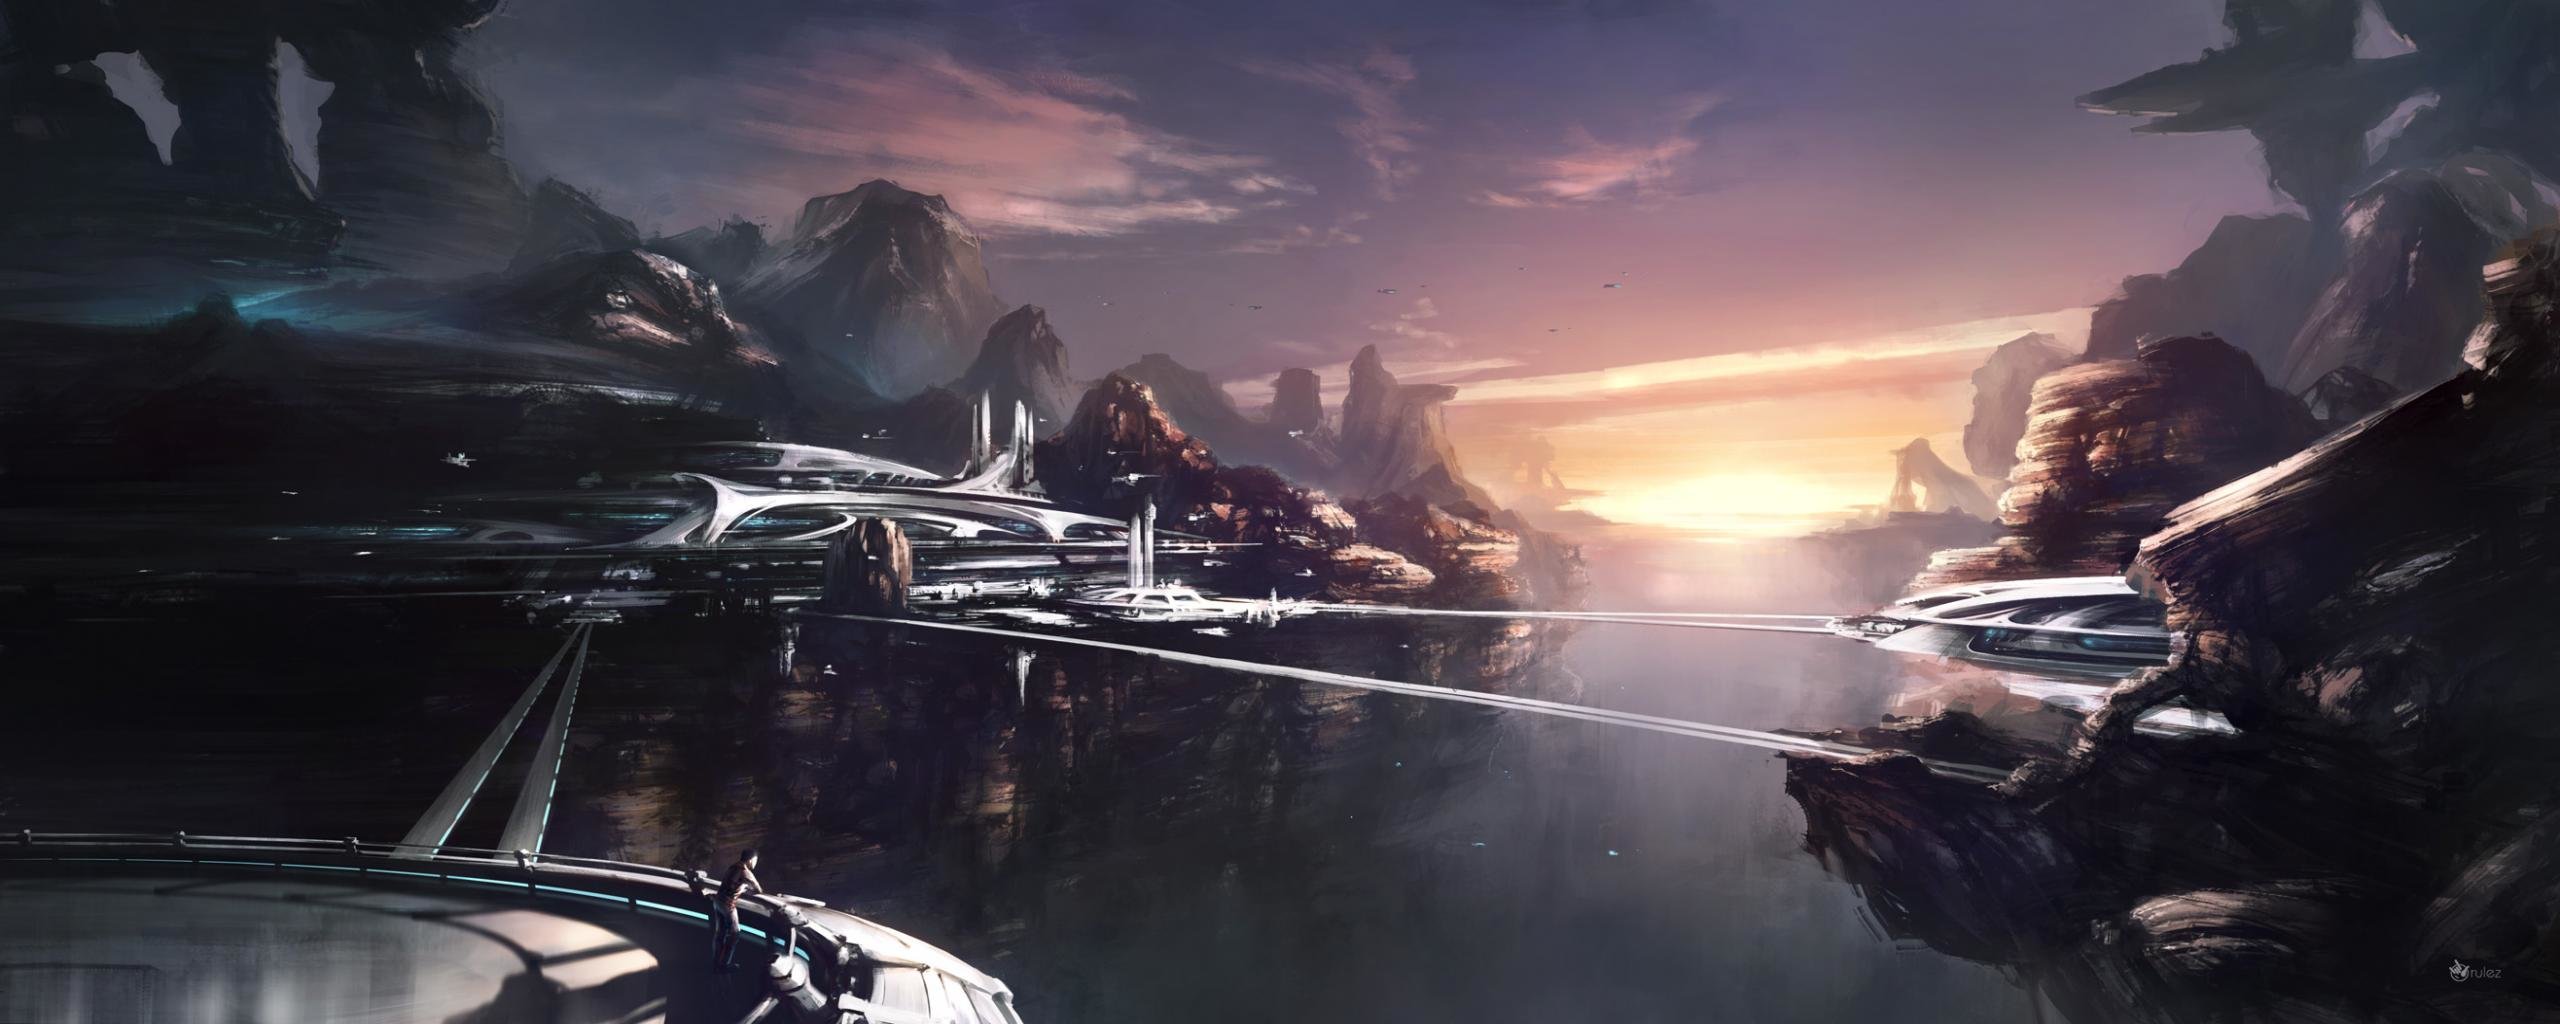 Free download Sci Fi landscape background ID:232882 dual monitor 2569x1024 for desktop